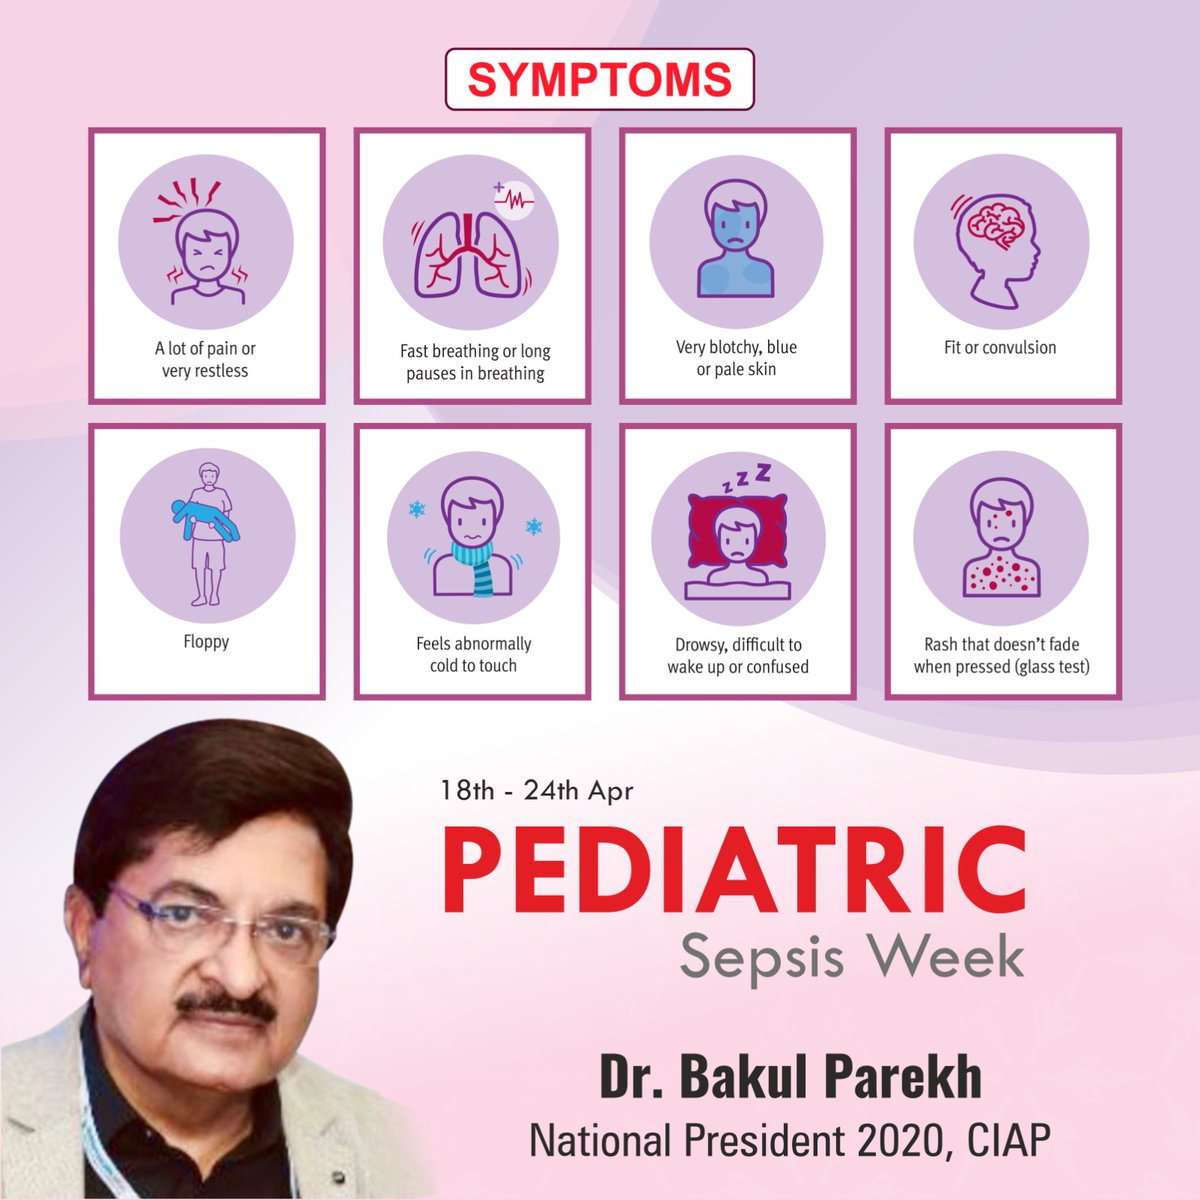 𝐏𝐄𝐃𝐈𝐀𝐓𝐑𝐈𝐂 𝐒𝐞𝐩𝐬𝐢𝐬 𝐖𝐞𝐞𝐤 🩺

Let's work together to educate and empower families and healthcare professionals ❤️

#bakuleshjayantparekh #pediatricsepsisweek #childhealth #PediatricCare #SepsisPrevention #earlydetection #ChildHealthMatters #childcare